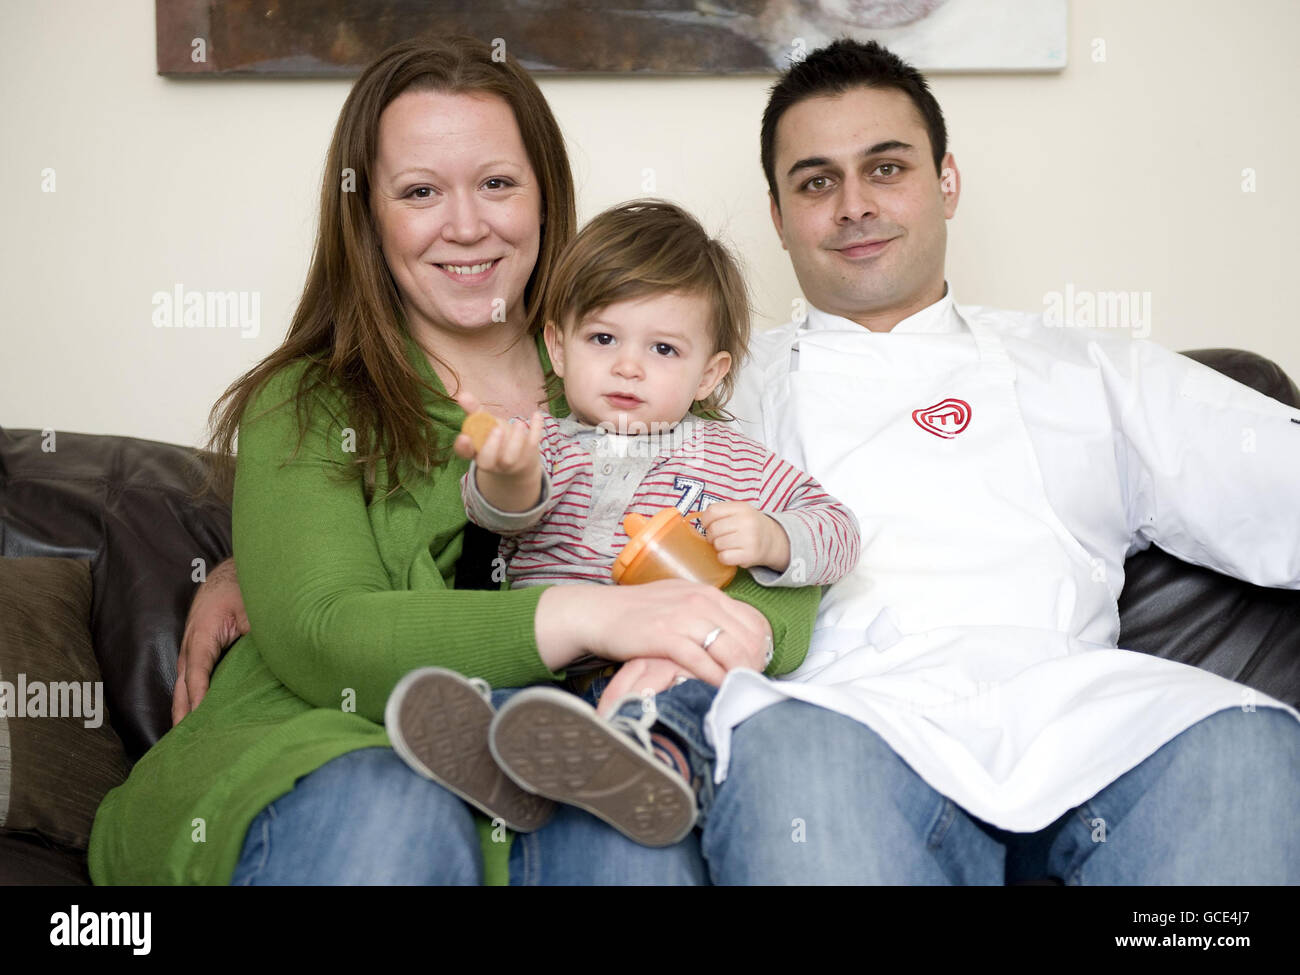 MasterChef winner Dhruv Baker, 34, with wife Aileen and son, 20 month-old Arunat, at his home in south London. Stock Photo